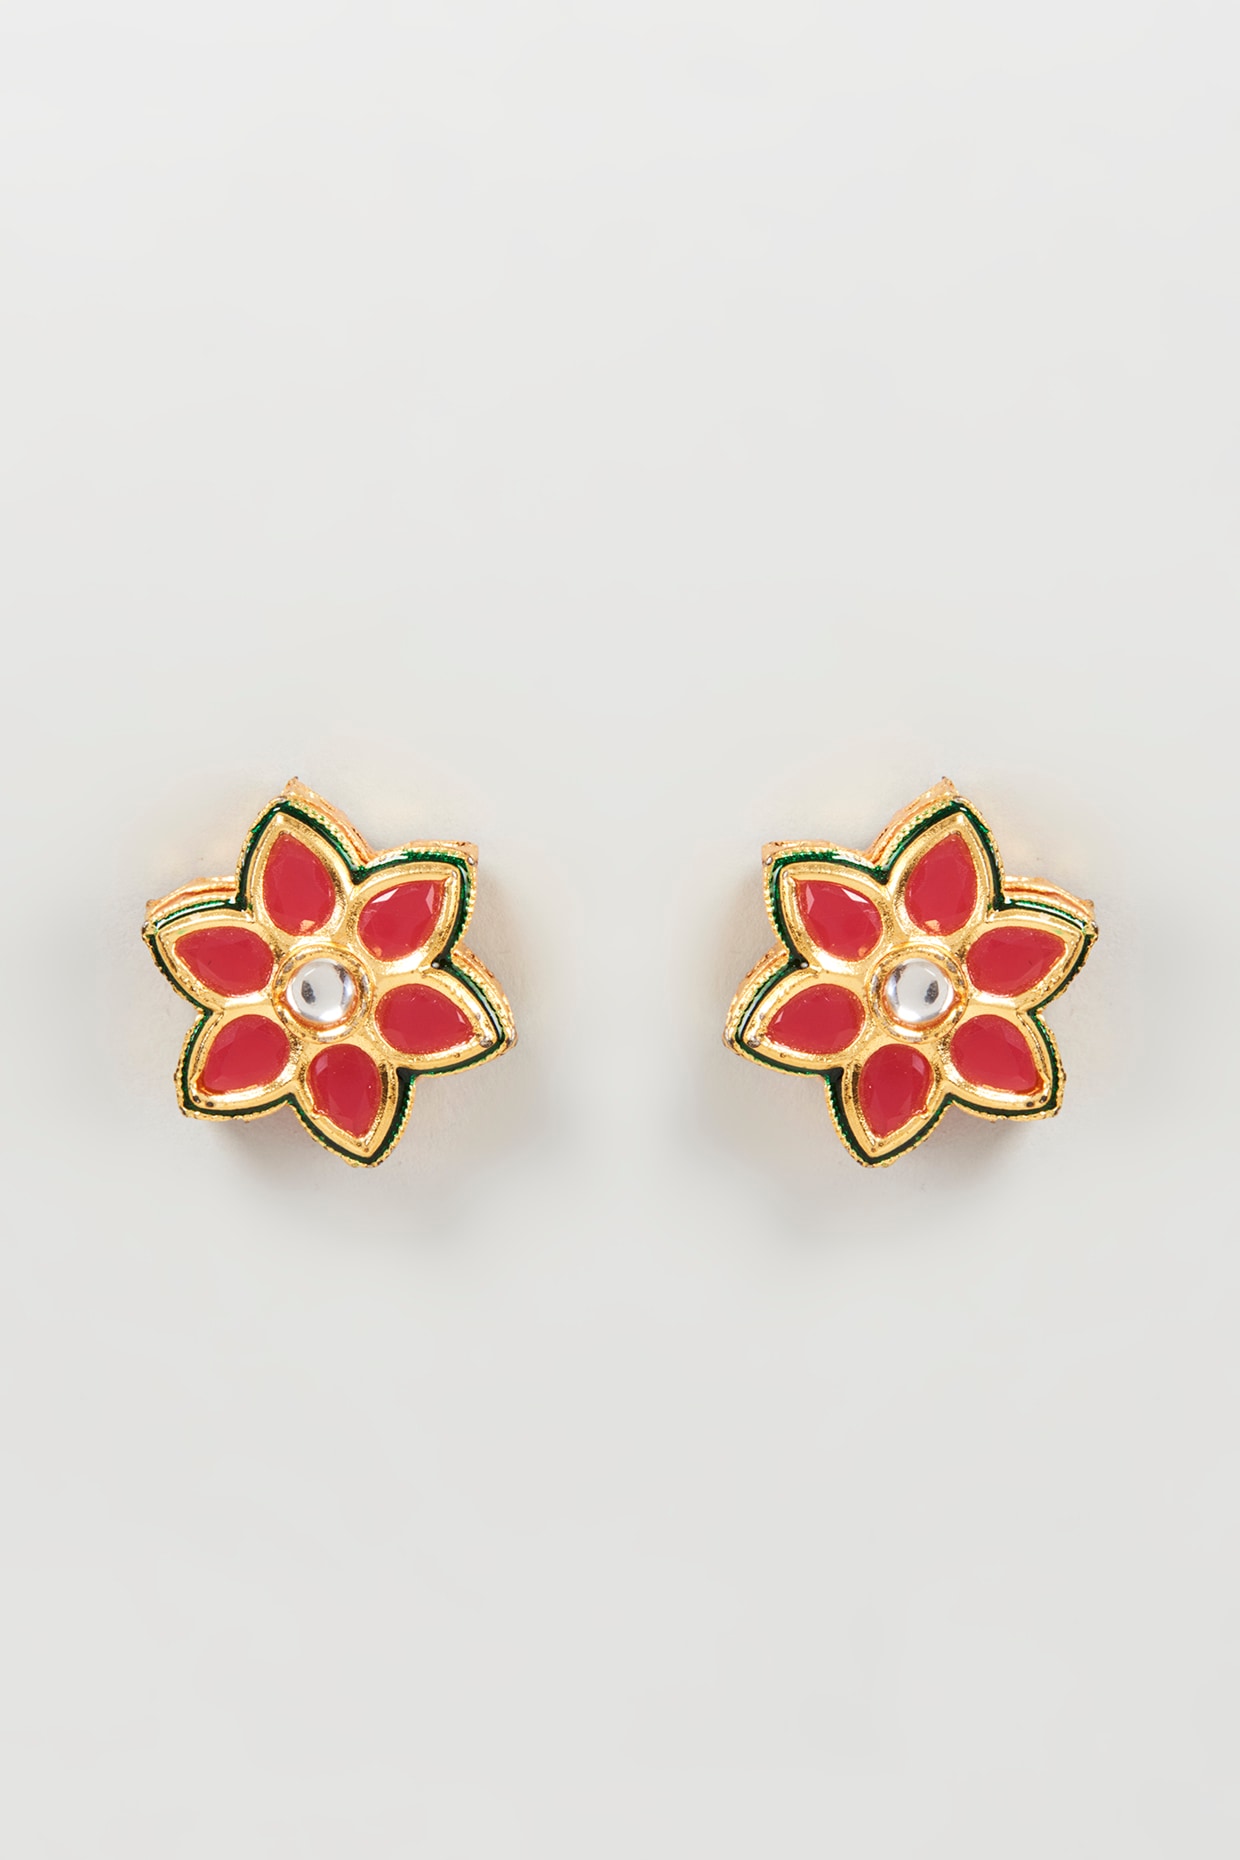 MAHIMAFASIONS Gold plated red avala daily use stud Earrings